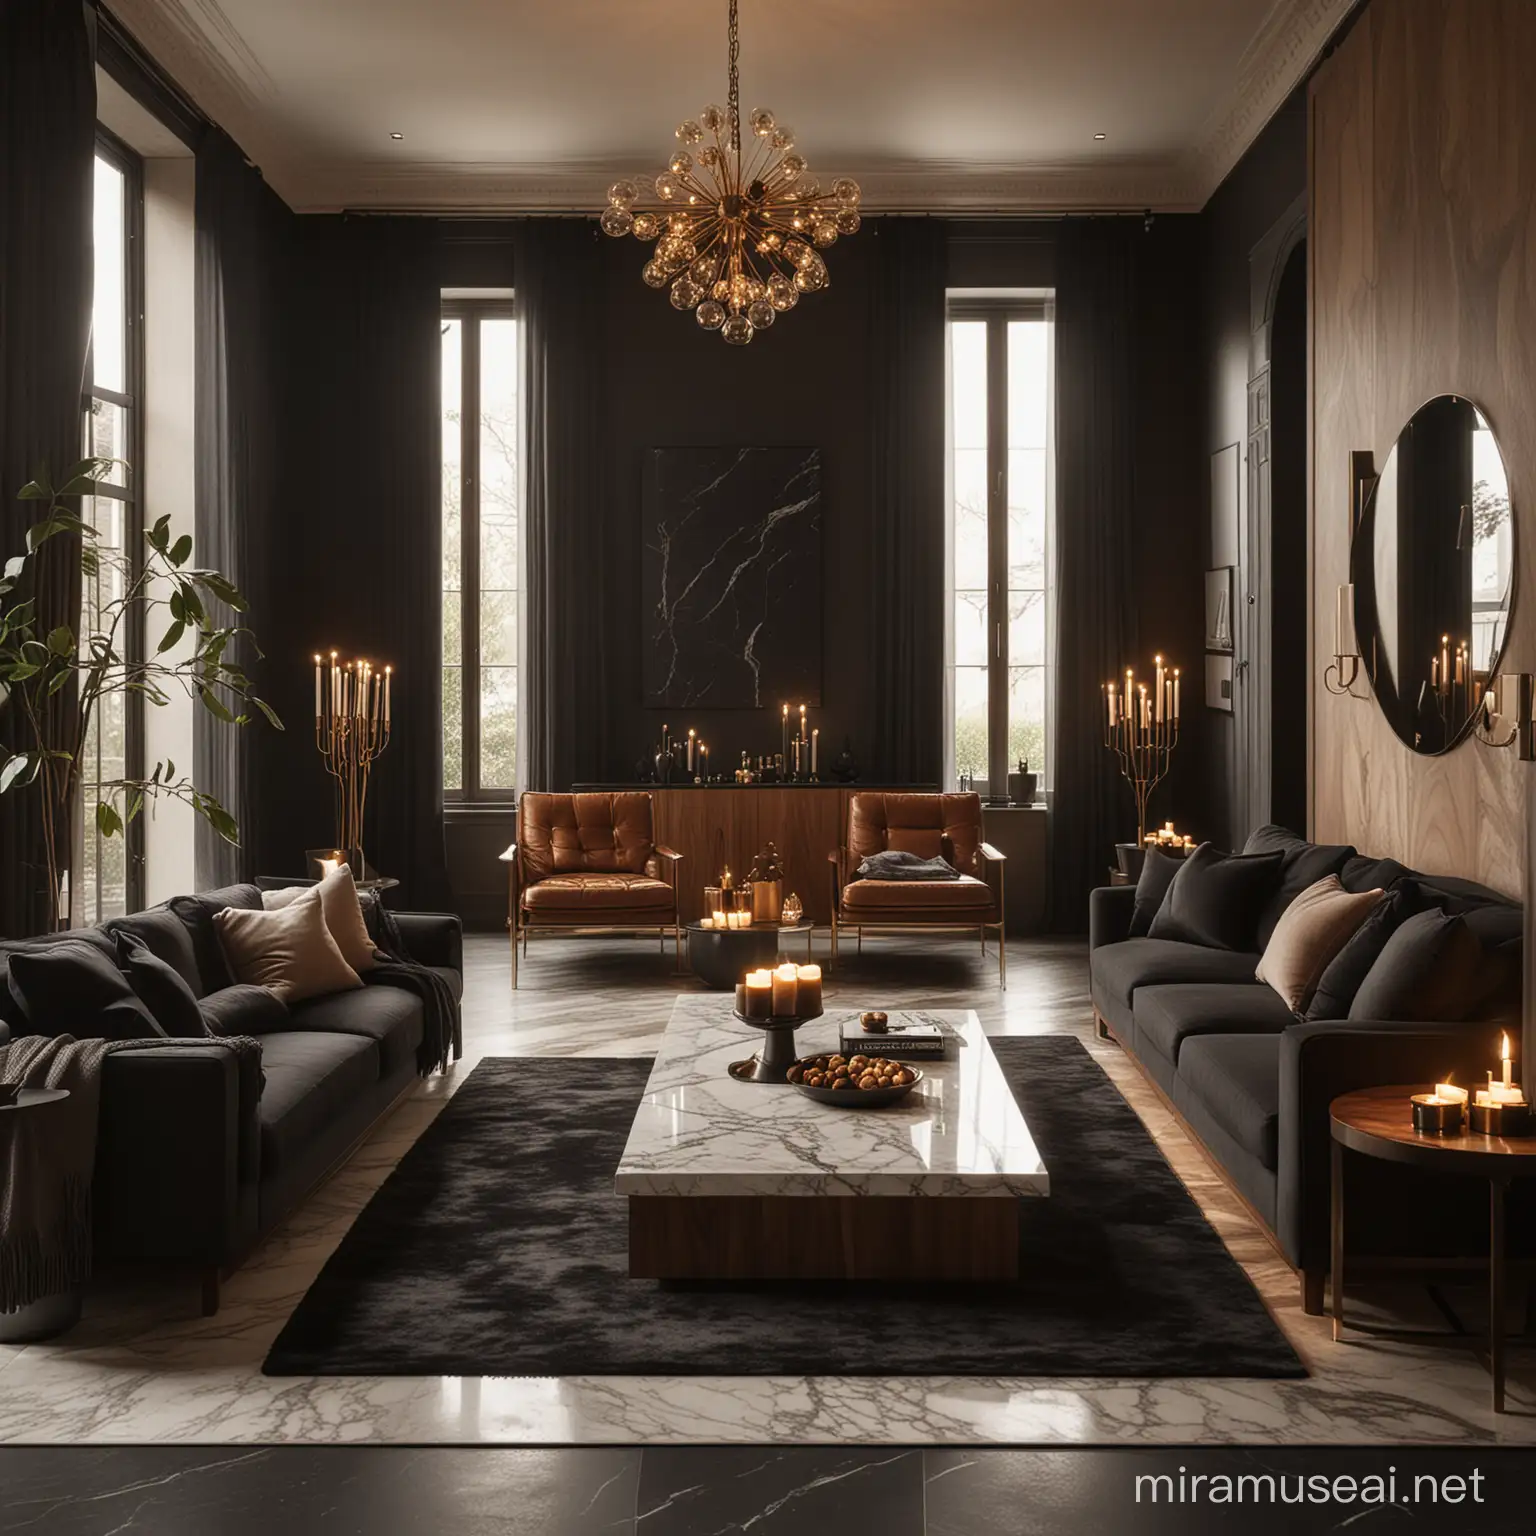 Elegant Black Living Room with Warm Candlelight and Walnut Accents